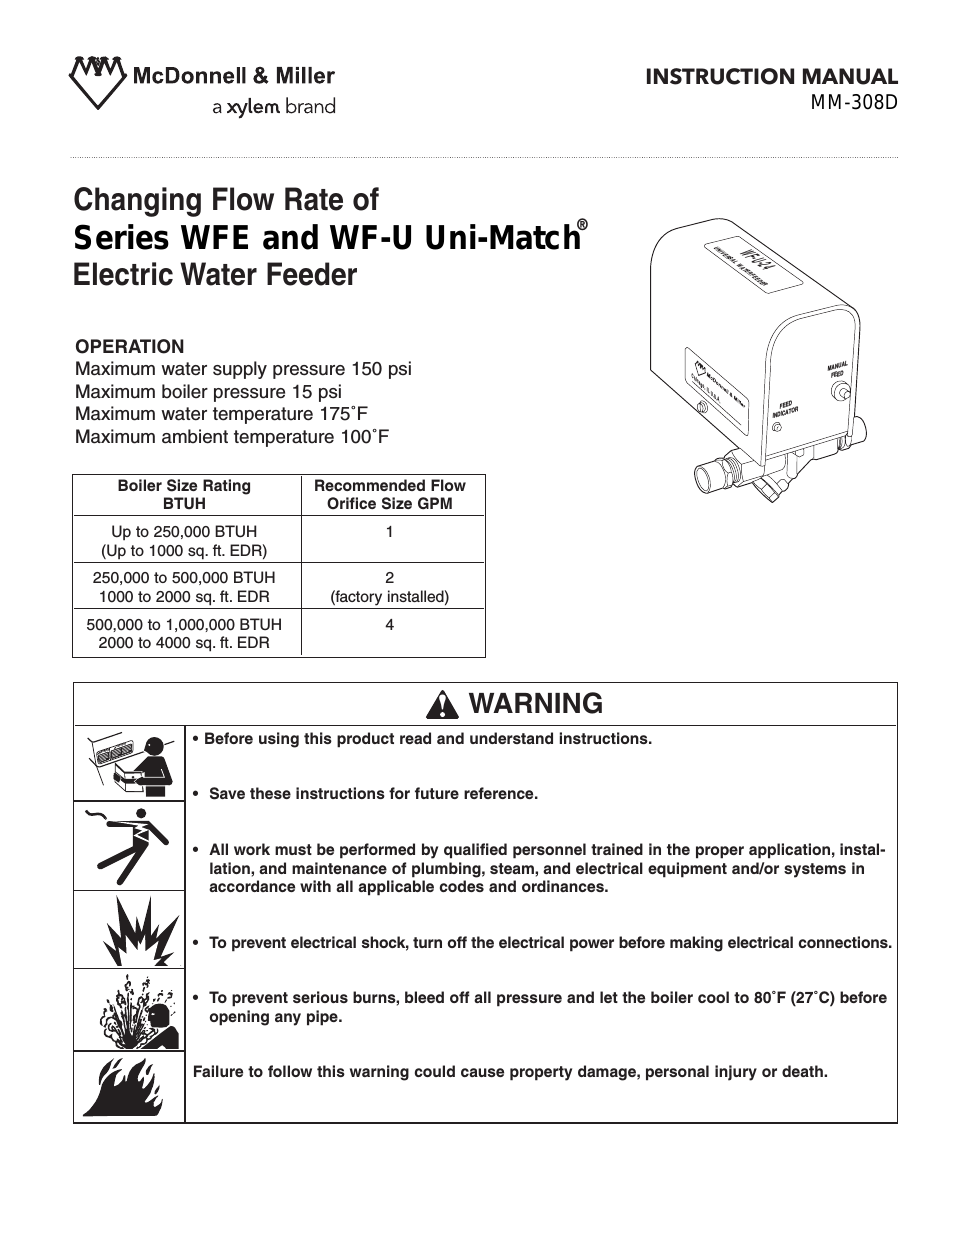 MM 308D Changing Flow Rate of Series WF-U Uni-Match Electric Water Feeder